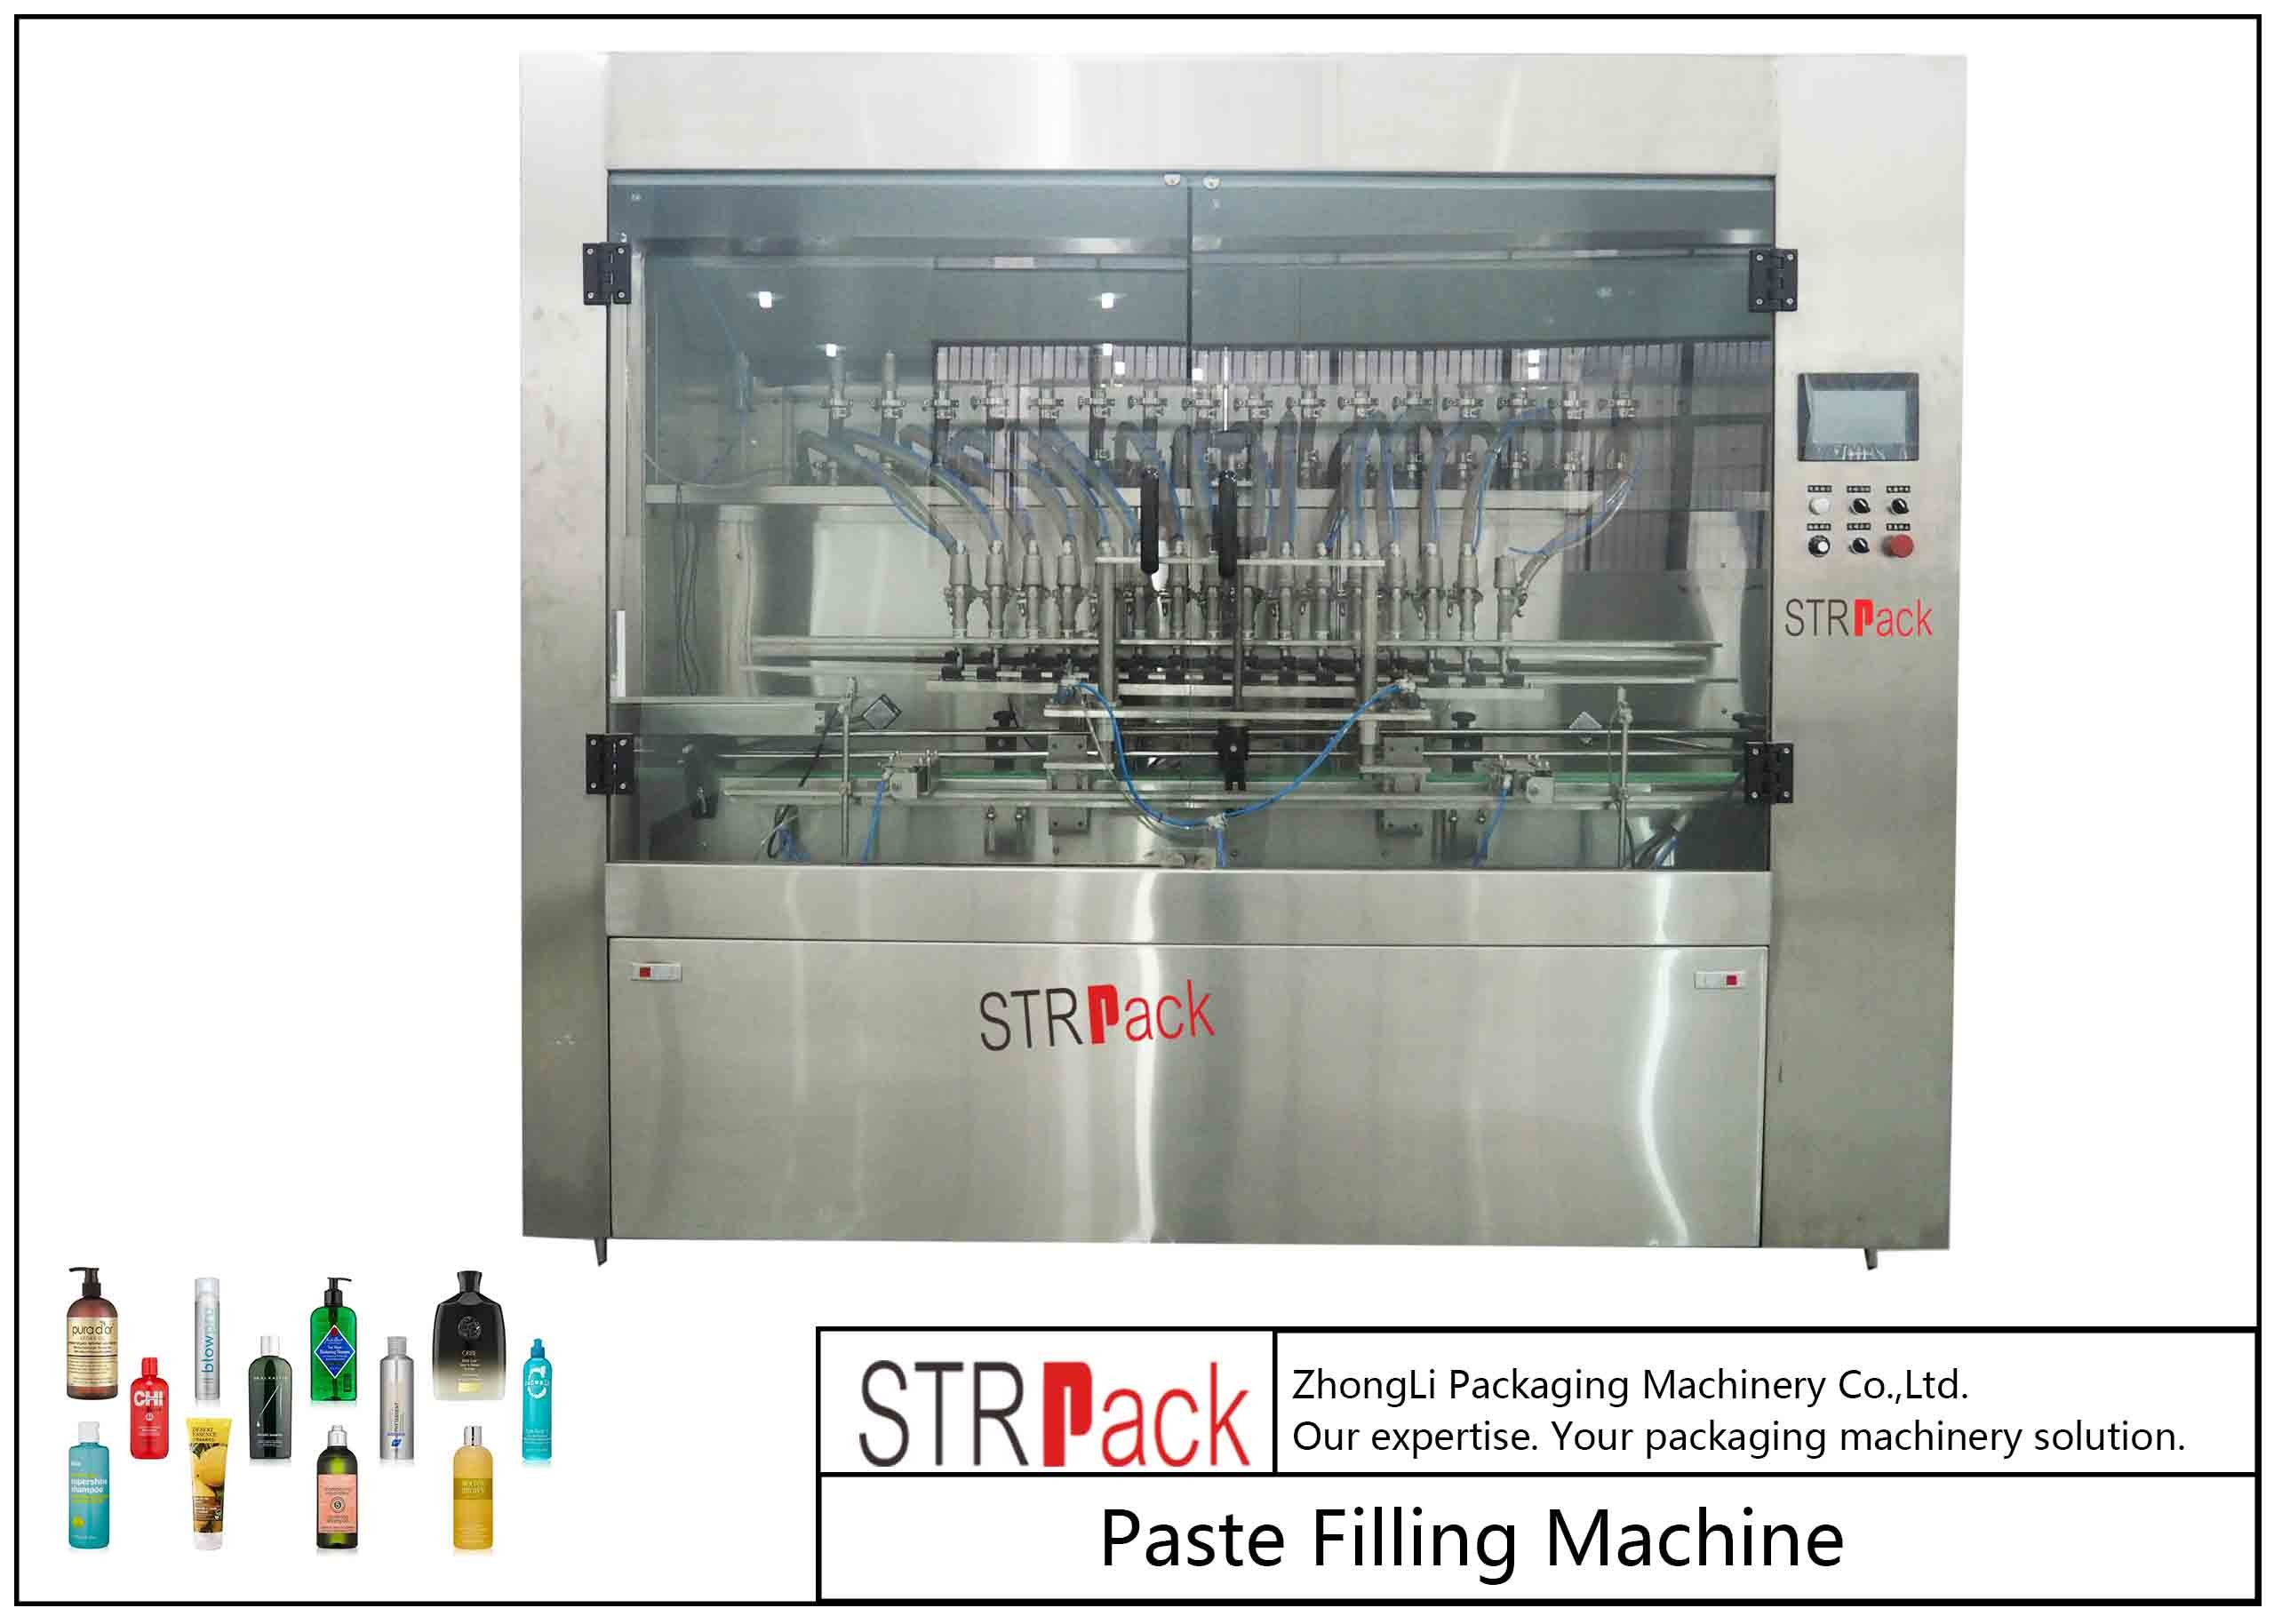 China Piston Servo Filling Machine / Fully Automatic Linear Filling Machine With Drop Down System factory